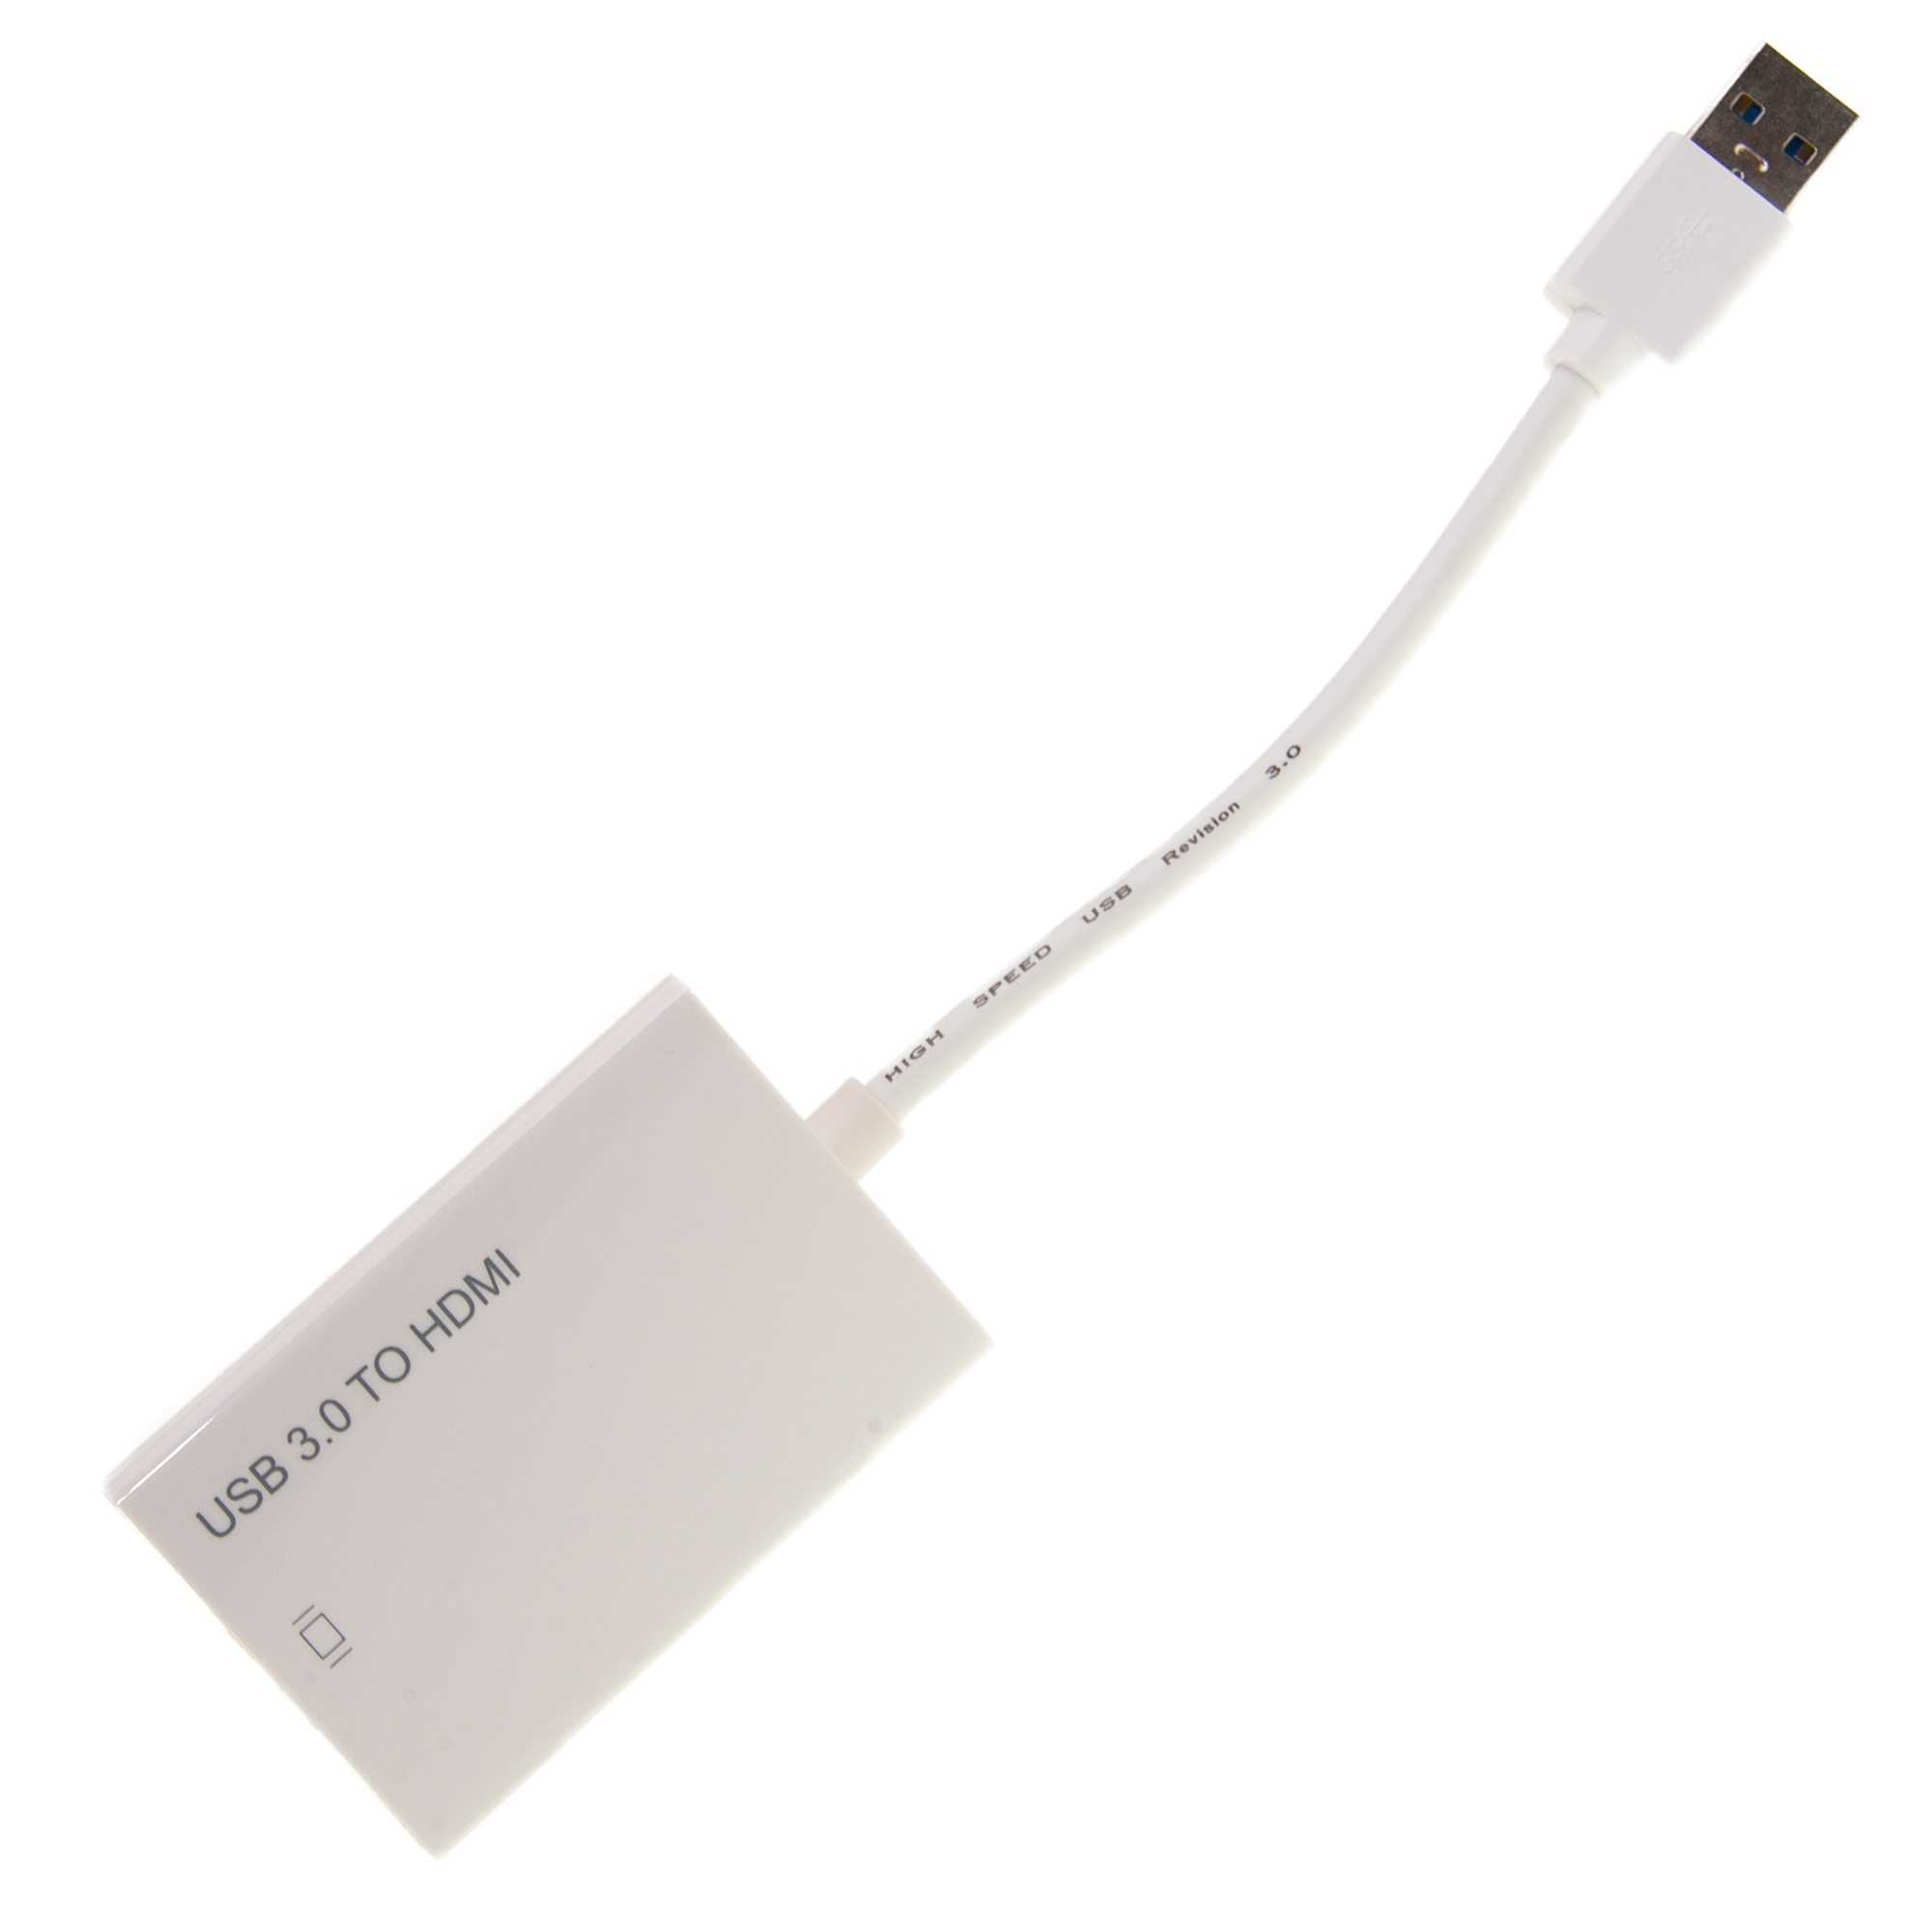 to HDMI Adapter, USB A port, and Apple/Mac